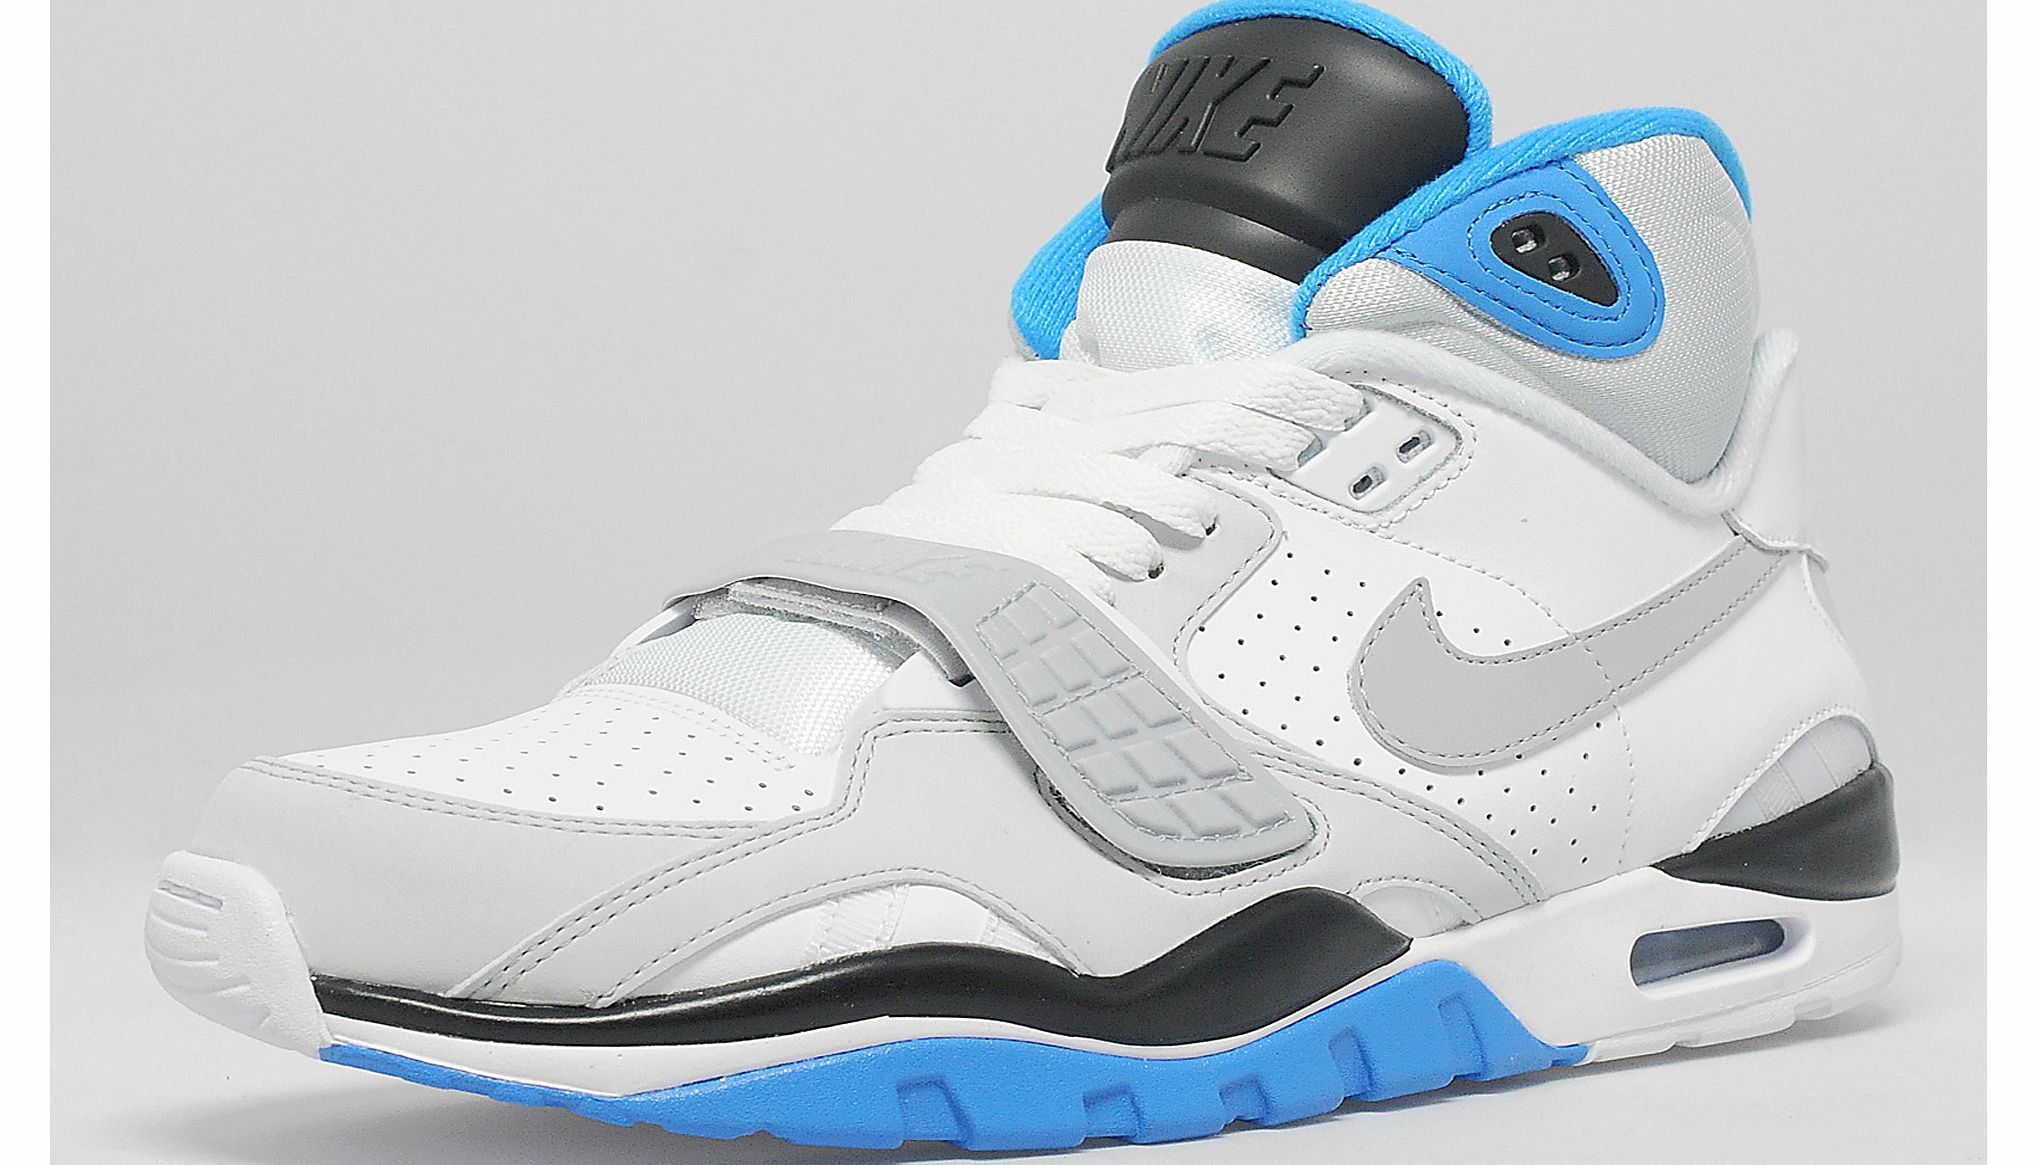 Nike Air Trainer Sc Ii Review Compare Prices Buy Online